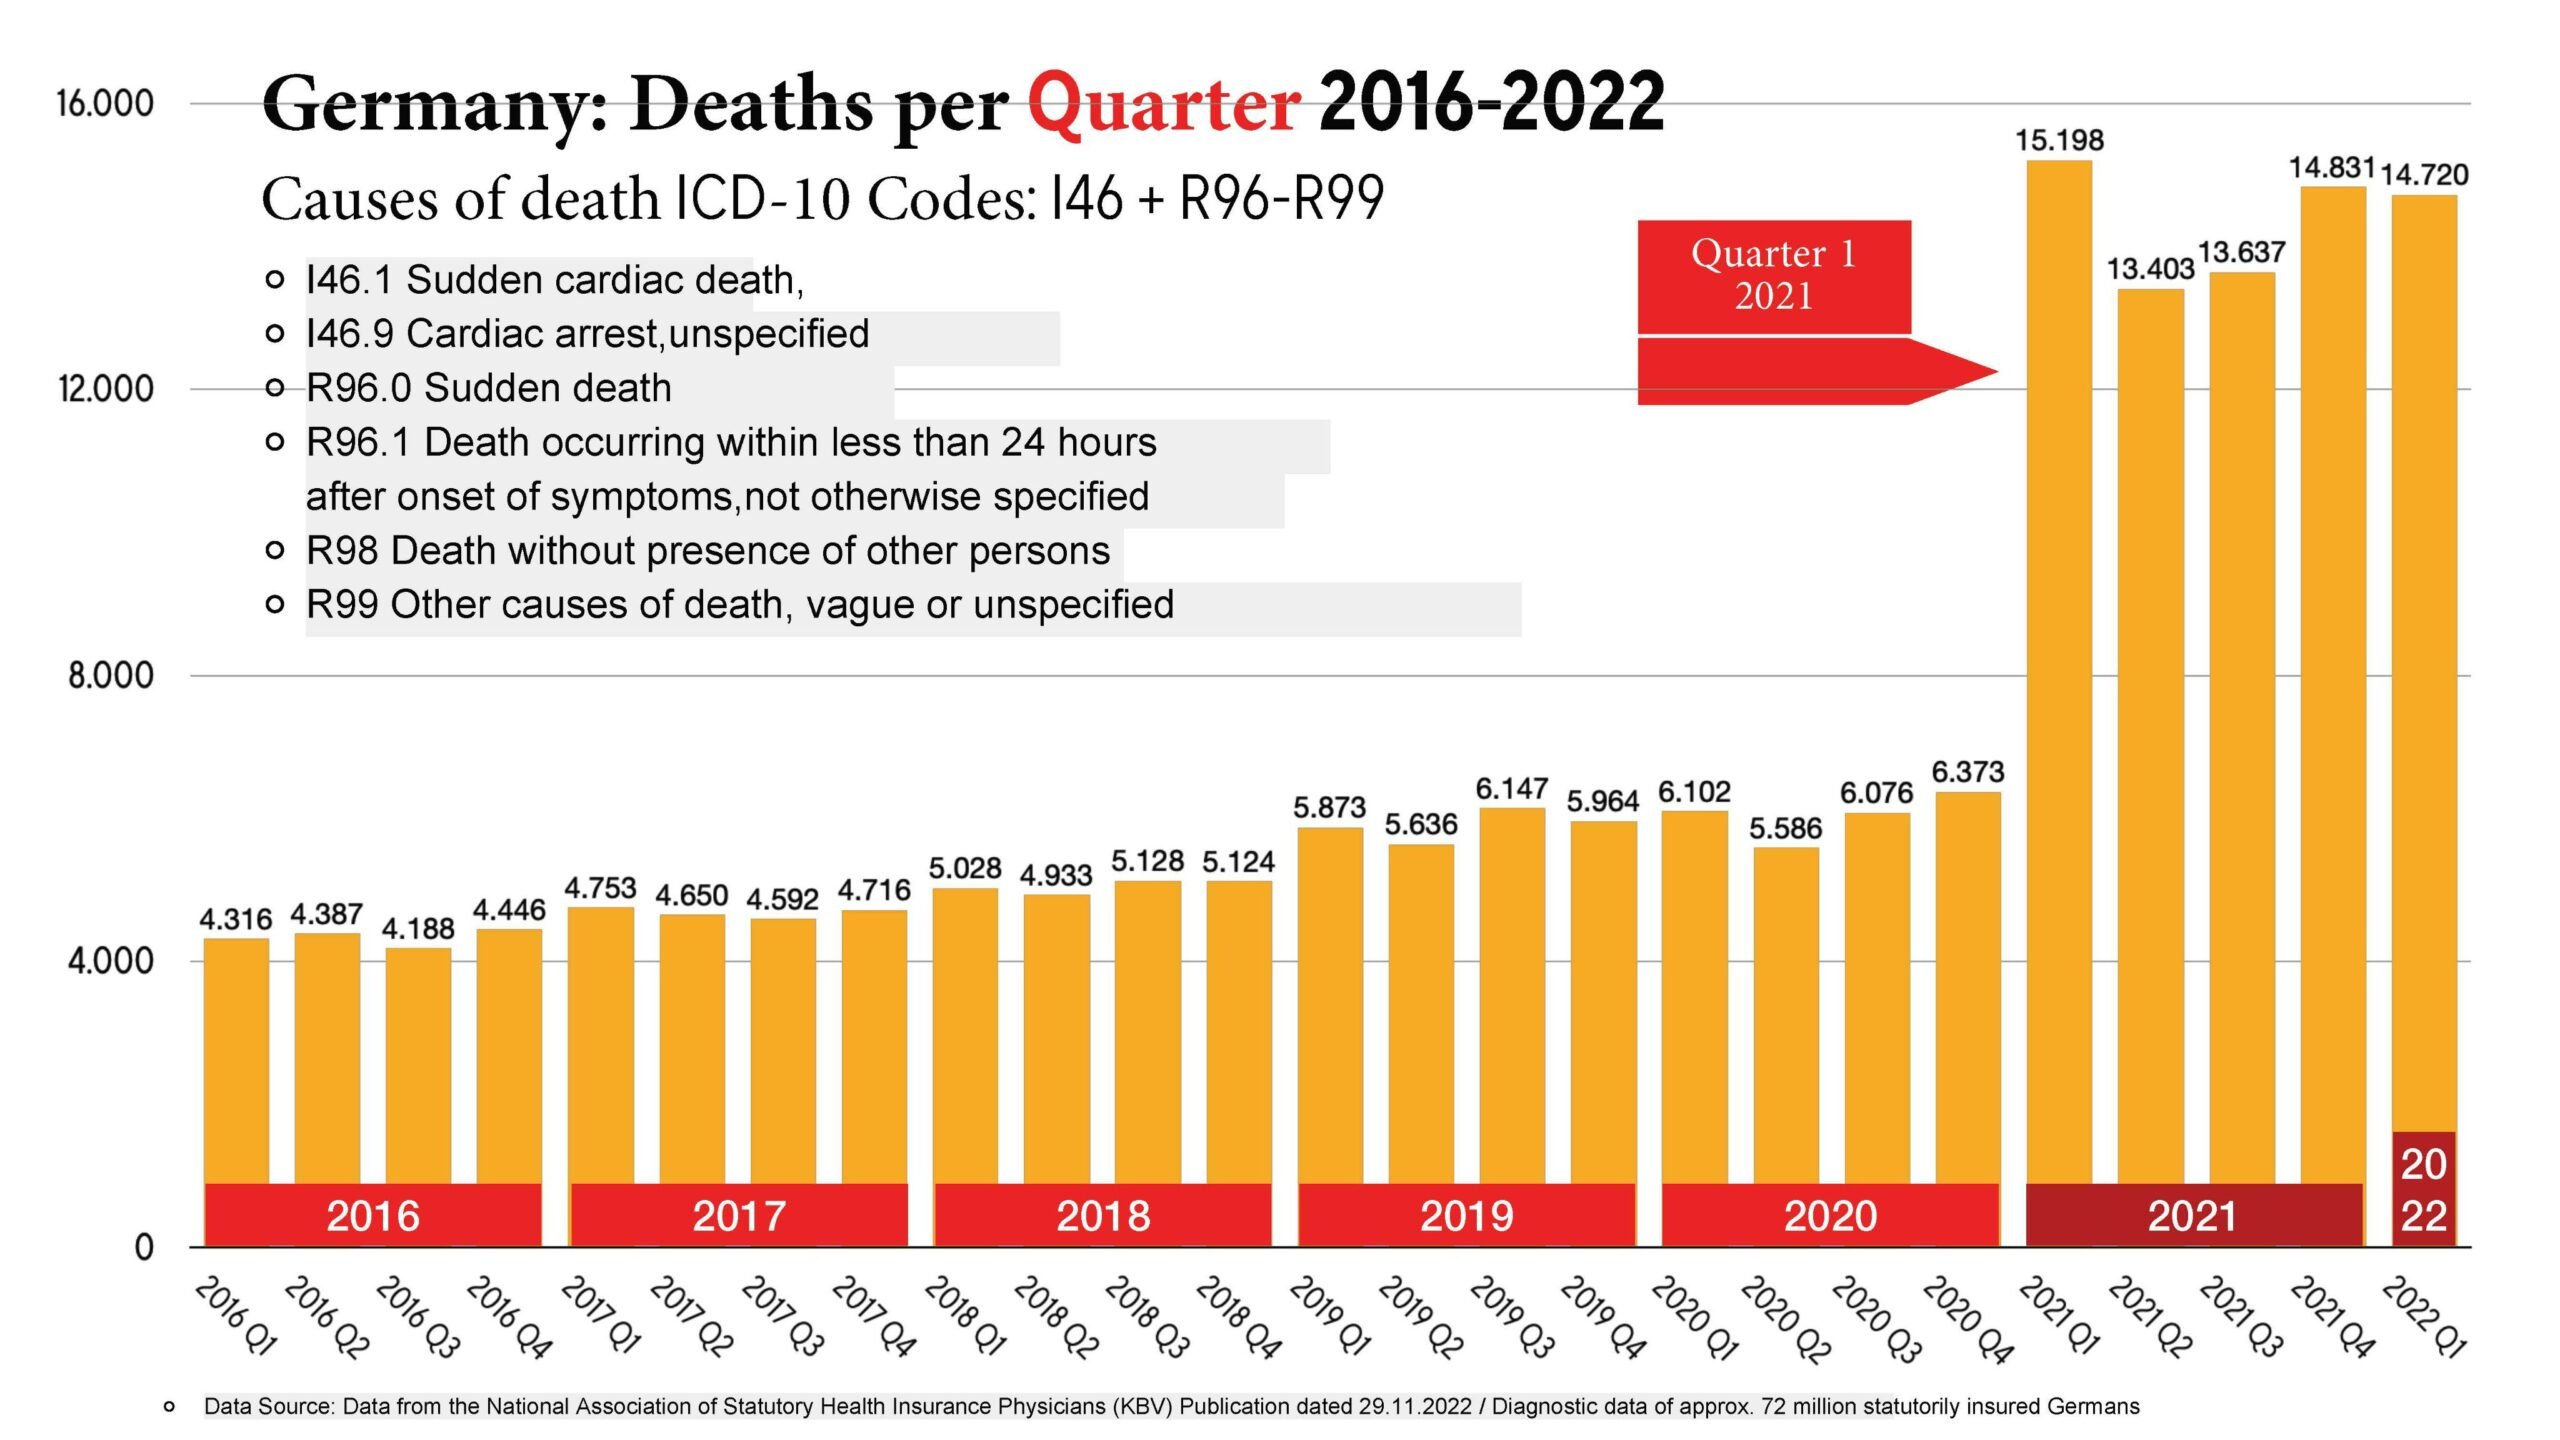 German Data Analyst Reveals Data from Health Insurance Shows 4 Times Increase in Sudden Deaths Following COVID Vaccine Rollouts